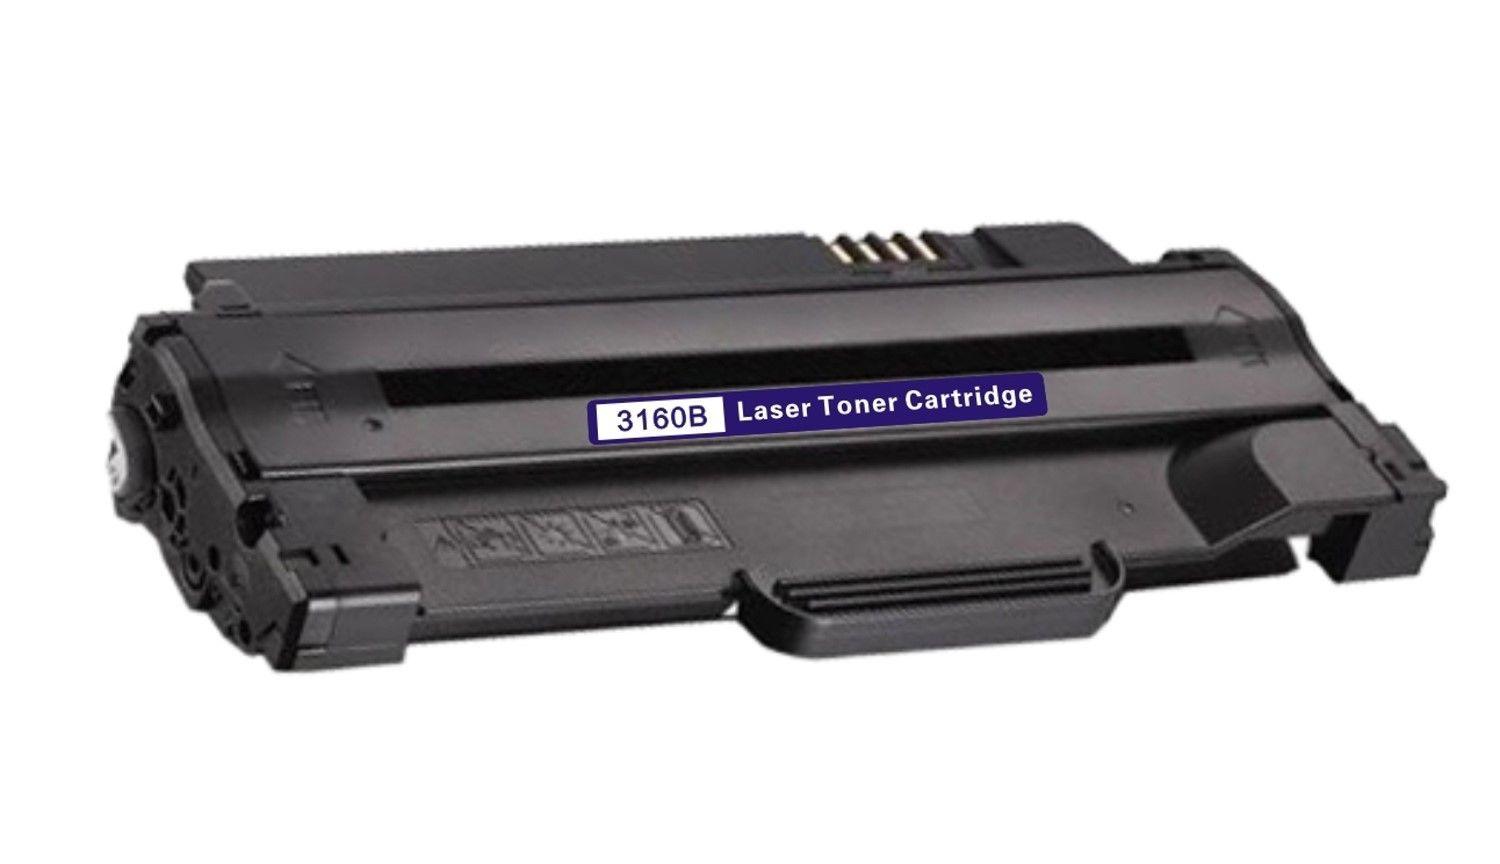 For Fuji Xerox Phaser 3140 / 3155 / 3160 Compatible Toner Cartridge (CWAA0805) | 2,500 pages for Phaser 3155 printer - Office Catch